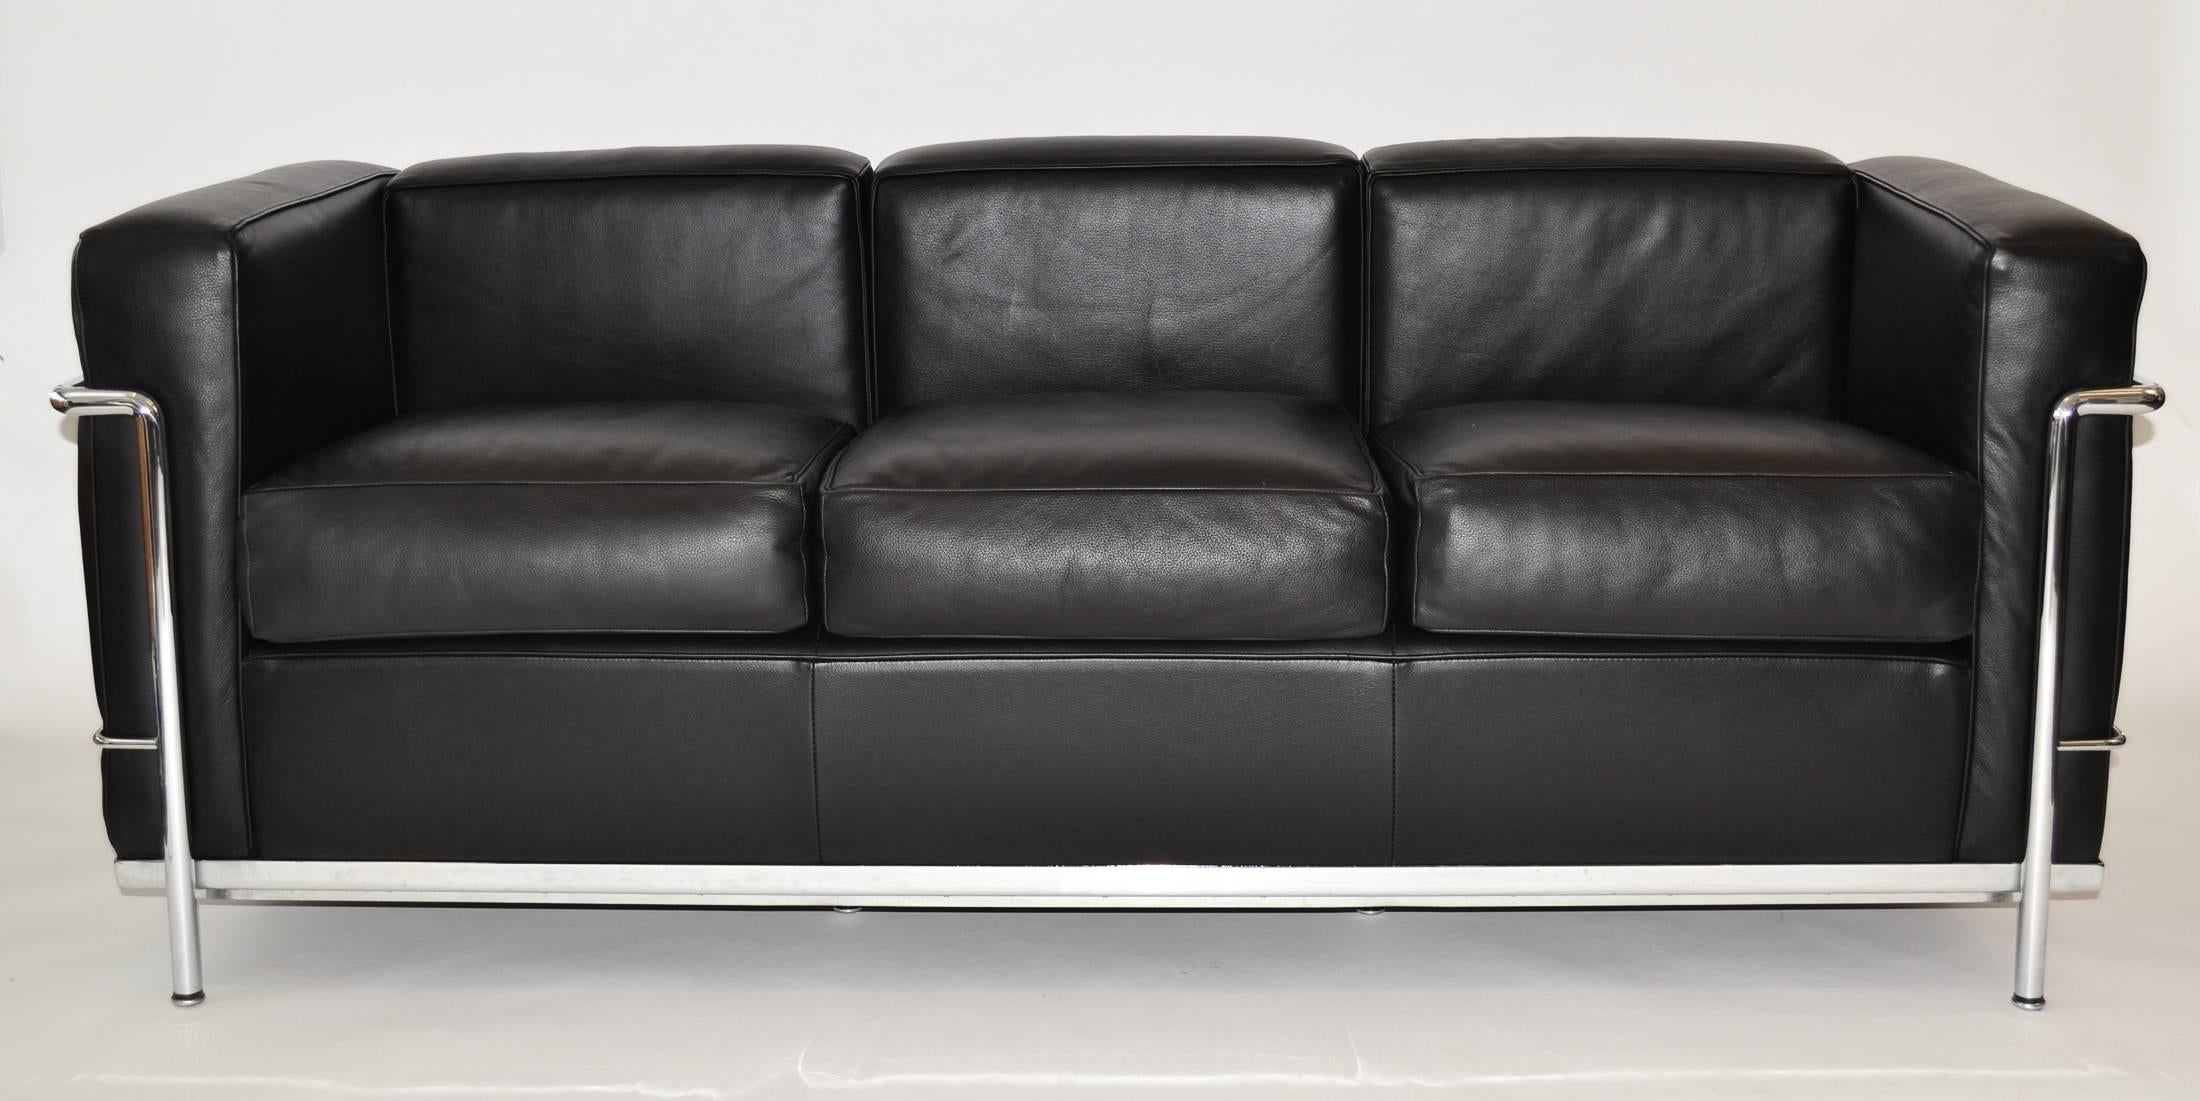 Classic LC2 three-seat leather sofa designed in 1928 by Le Corbusier, produced by Cassina, circa 1980s. Frame is trivalent chrome-plated steel. Upholstered in full-grain Italian leather. A fine example. Labeled.
      